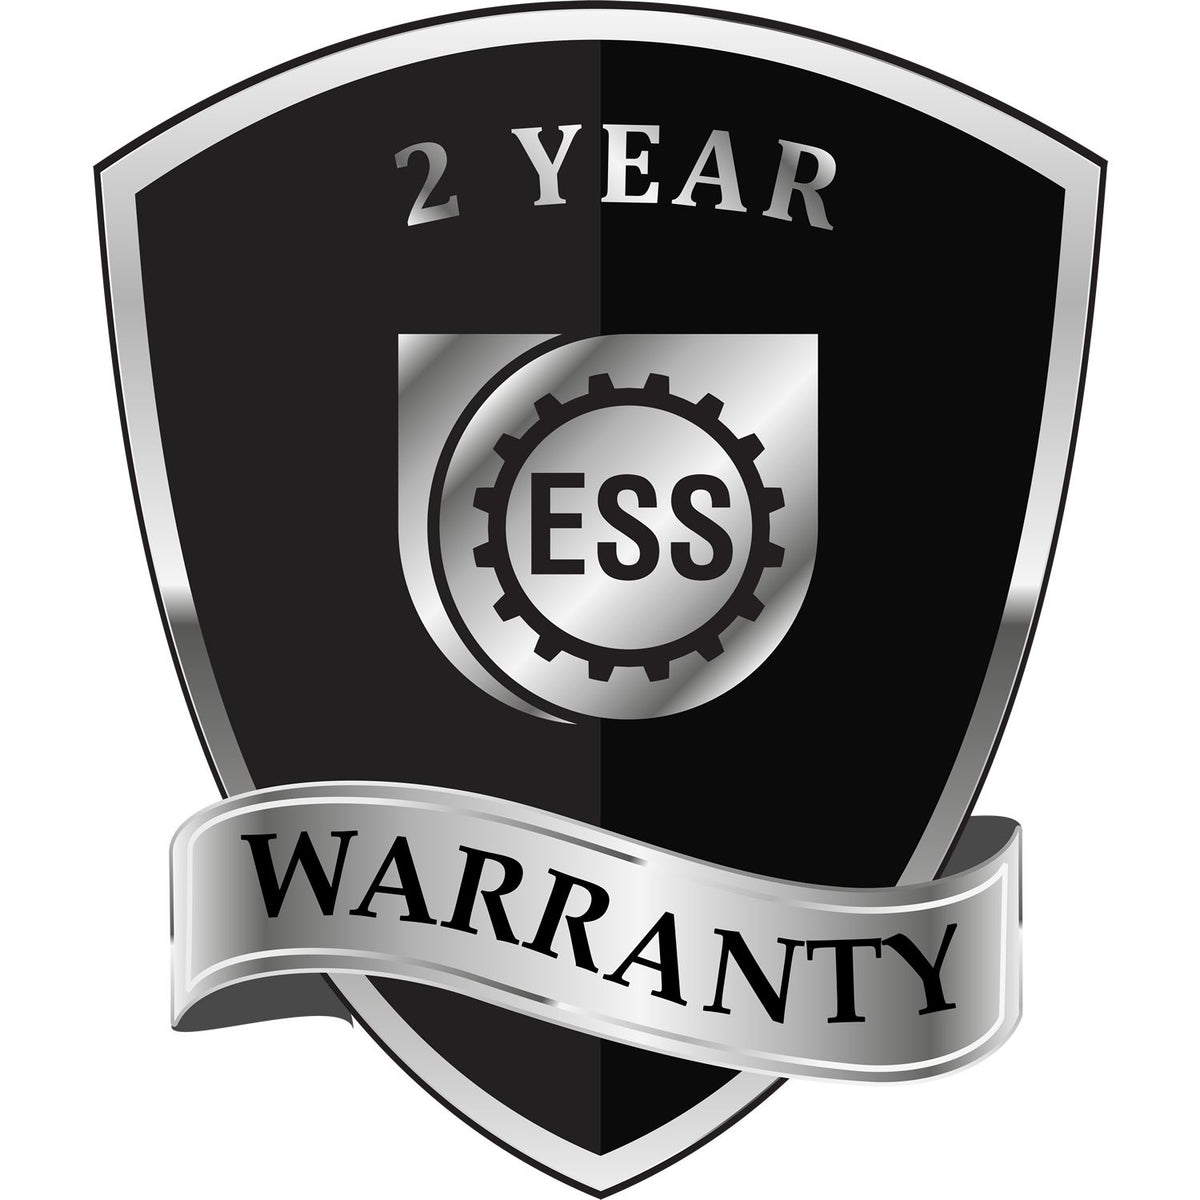 A badge or emblem showing a warranty icon for the Heavy Duty Cast Iron Washington Engineer Seal Embosser